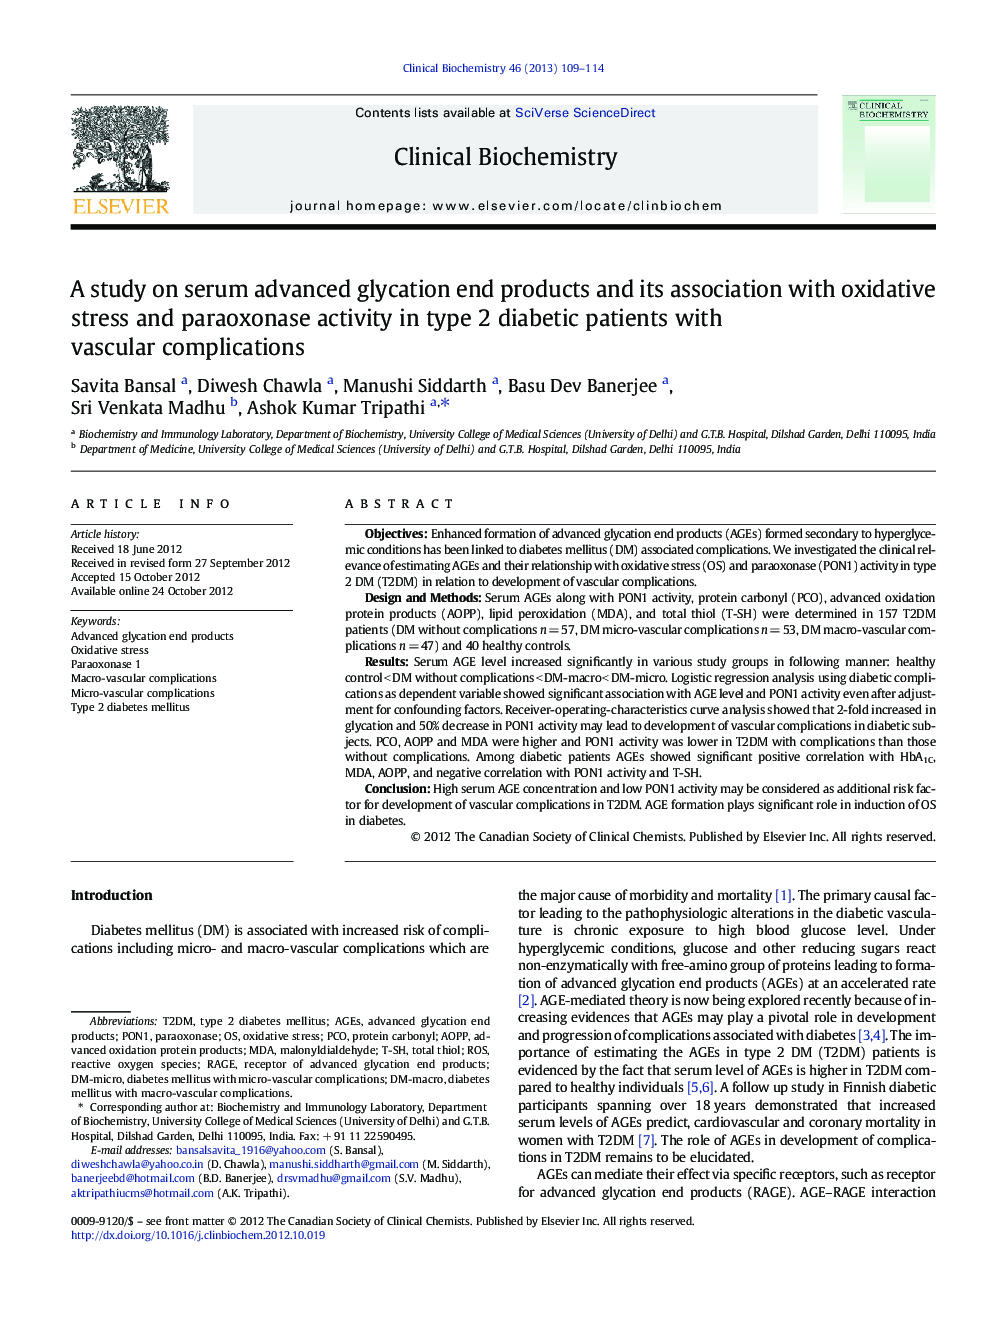 A study on serum advanced glycation end products and its association with oxidative stress and paraoxonase activity in type 2 diabetic patients with vascular complications